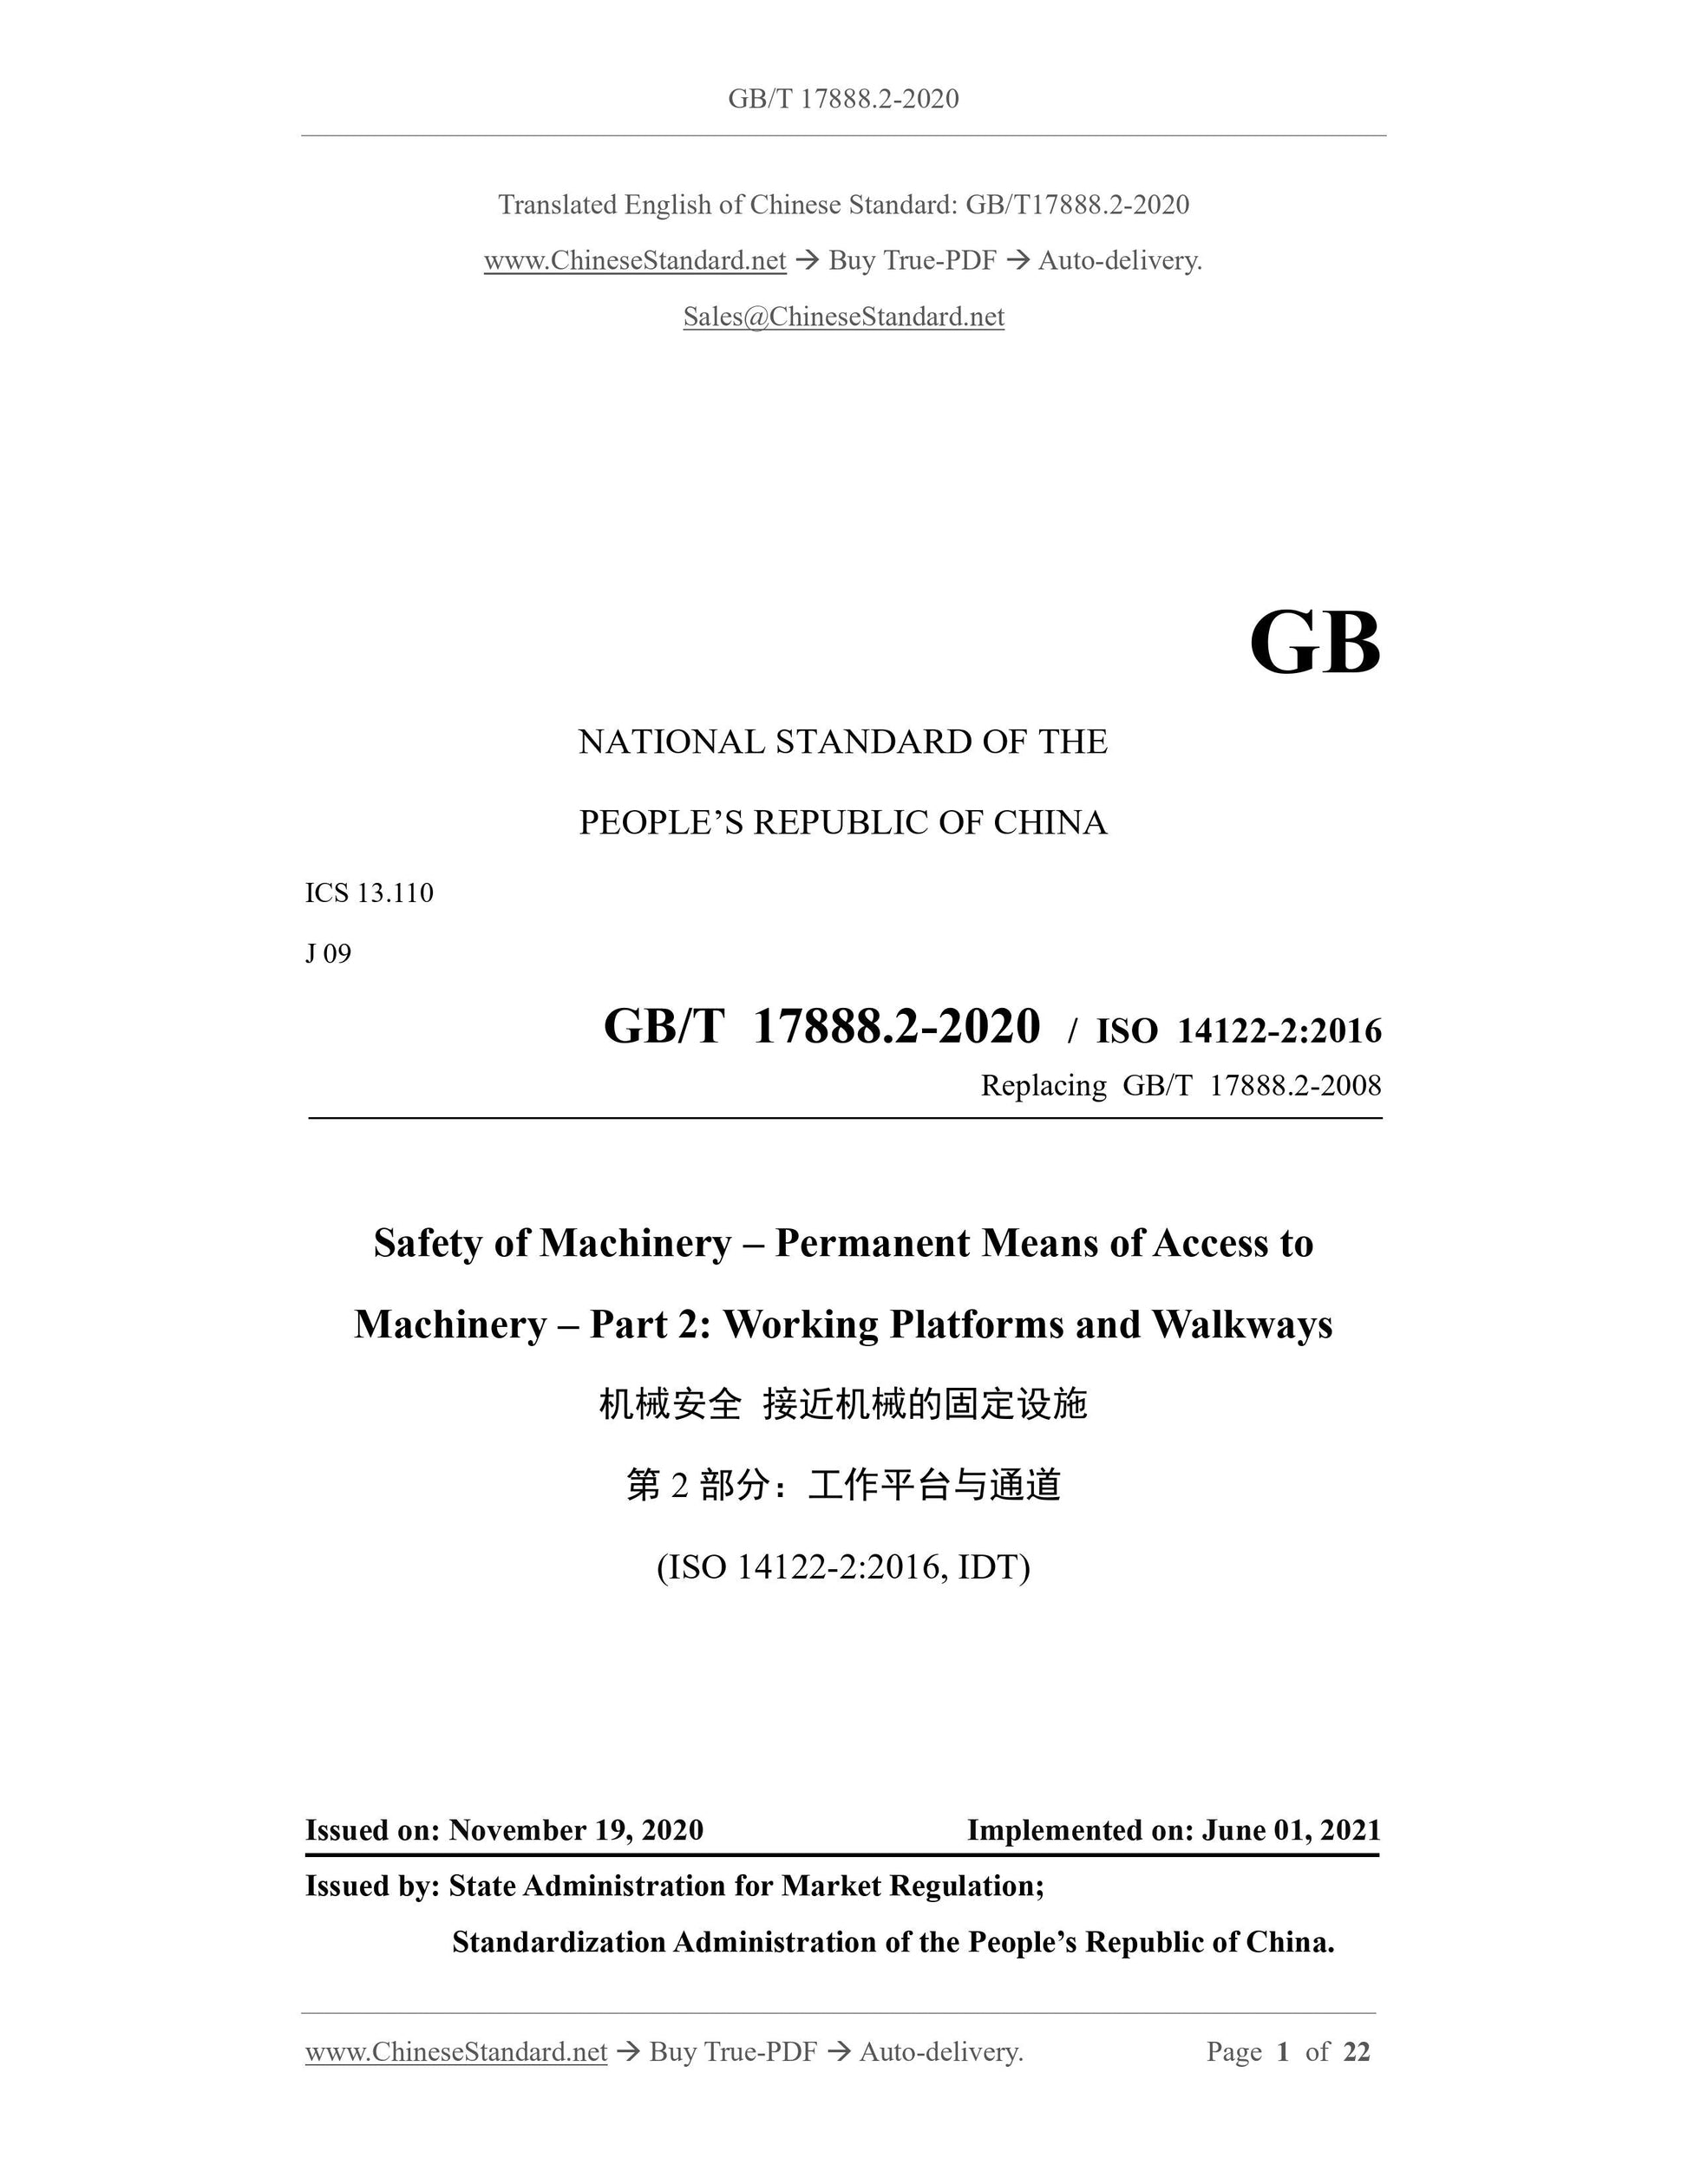 GB/T 17888.2-2020 Page 1